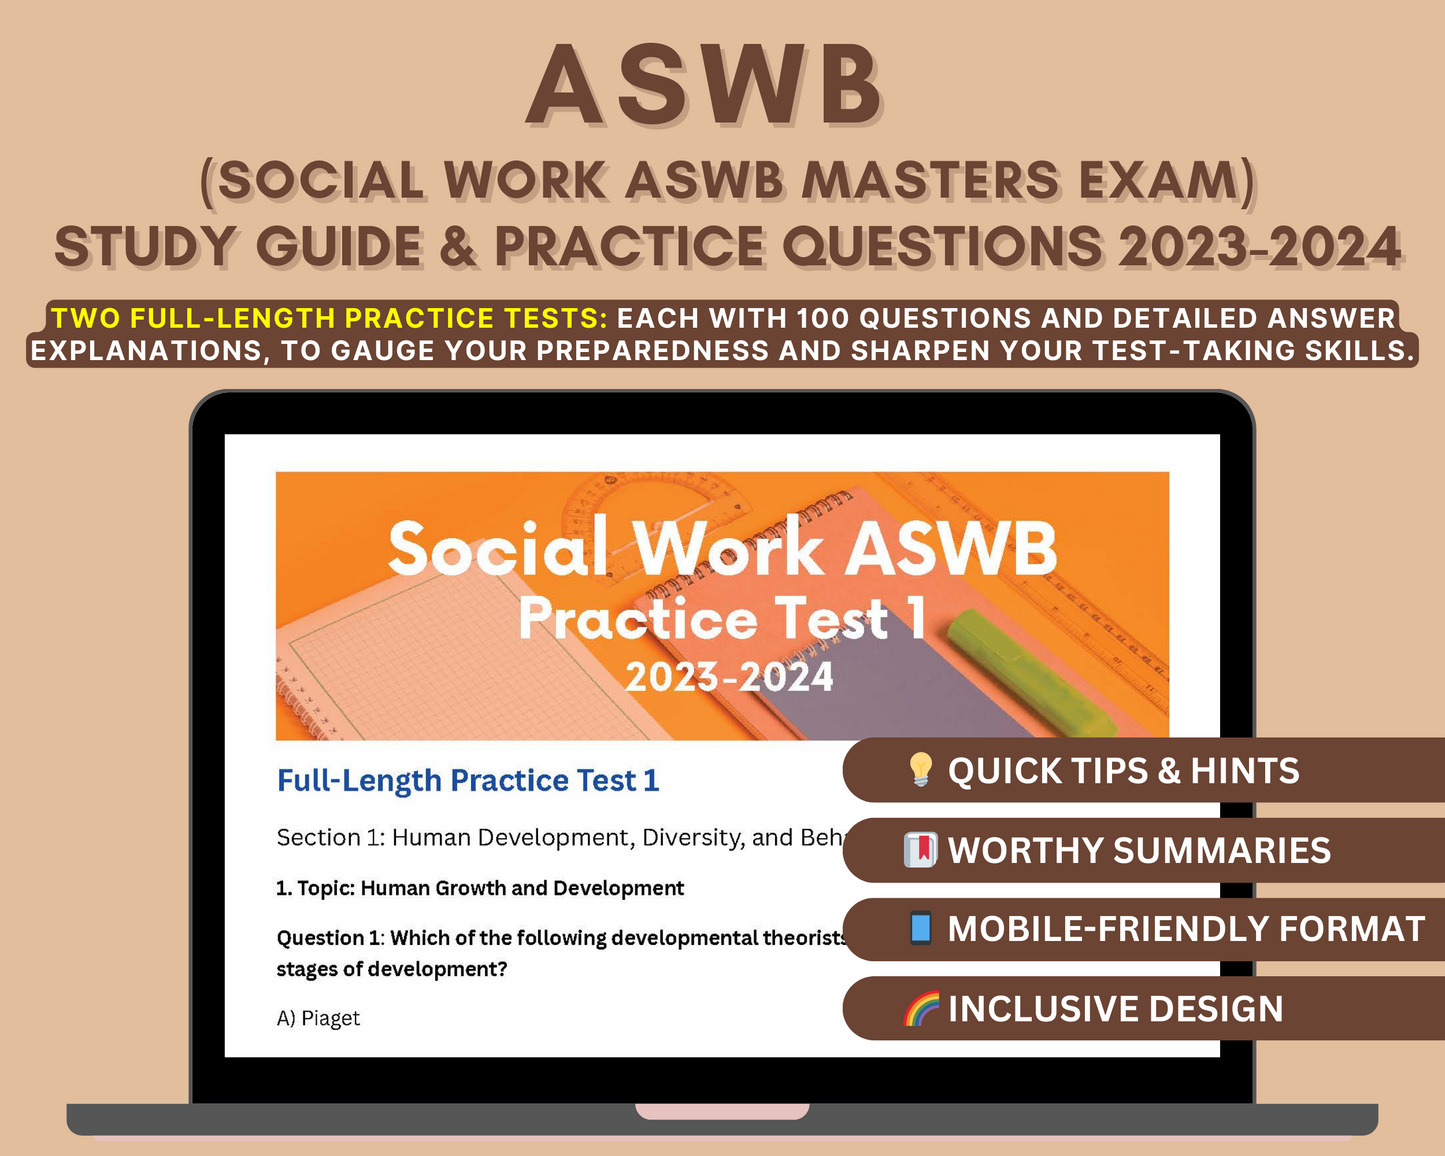 ASWB Masters Exam Study Guide 2023-2024: In-Depth Content Review, and Practice Tests for Social Work Licensure Success